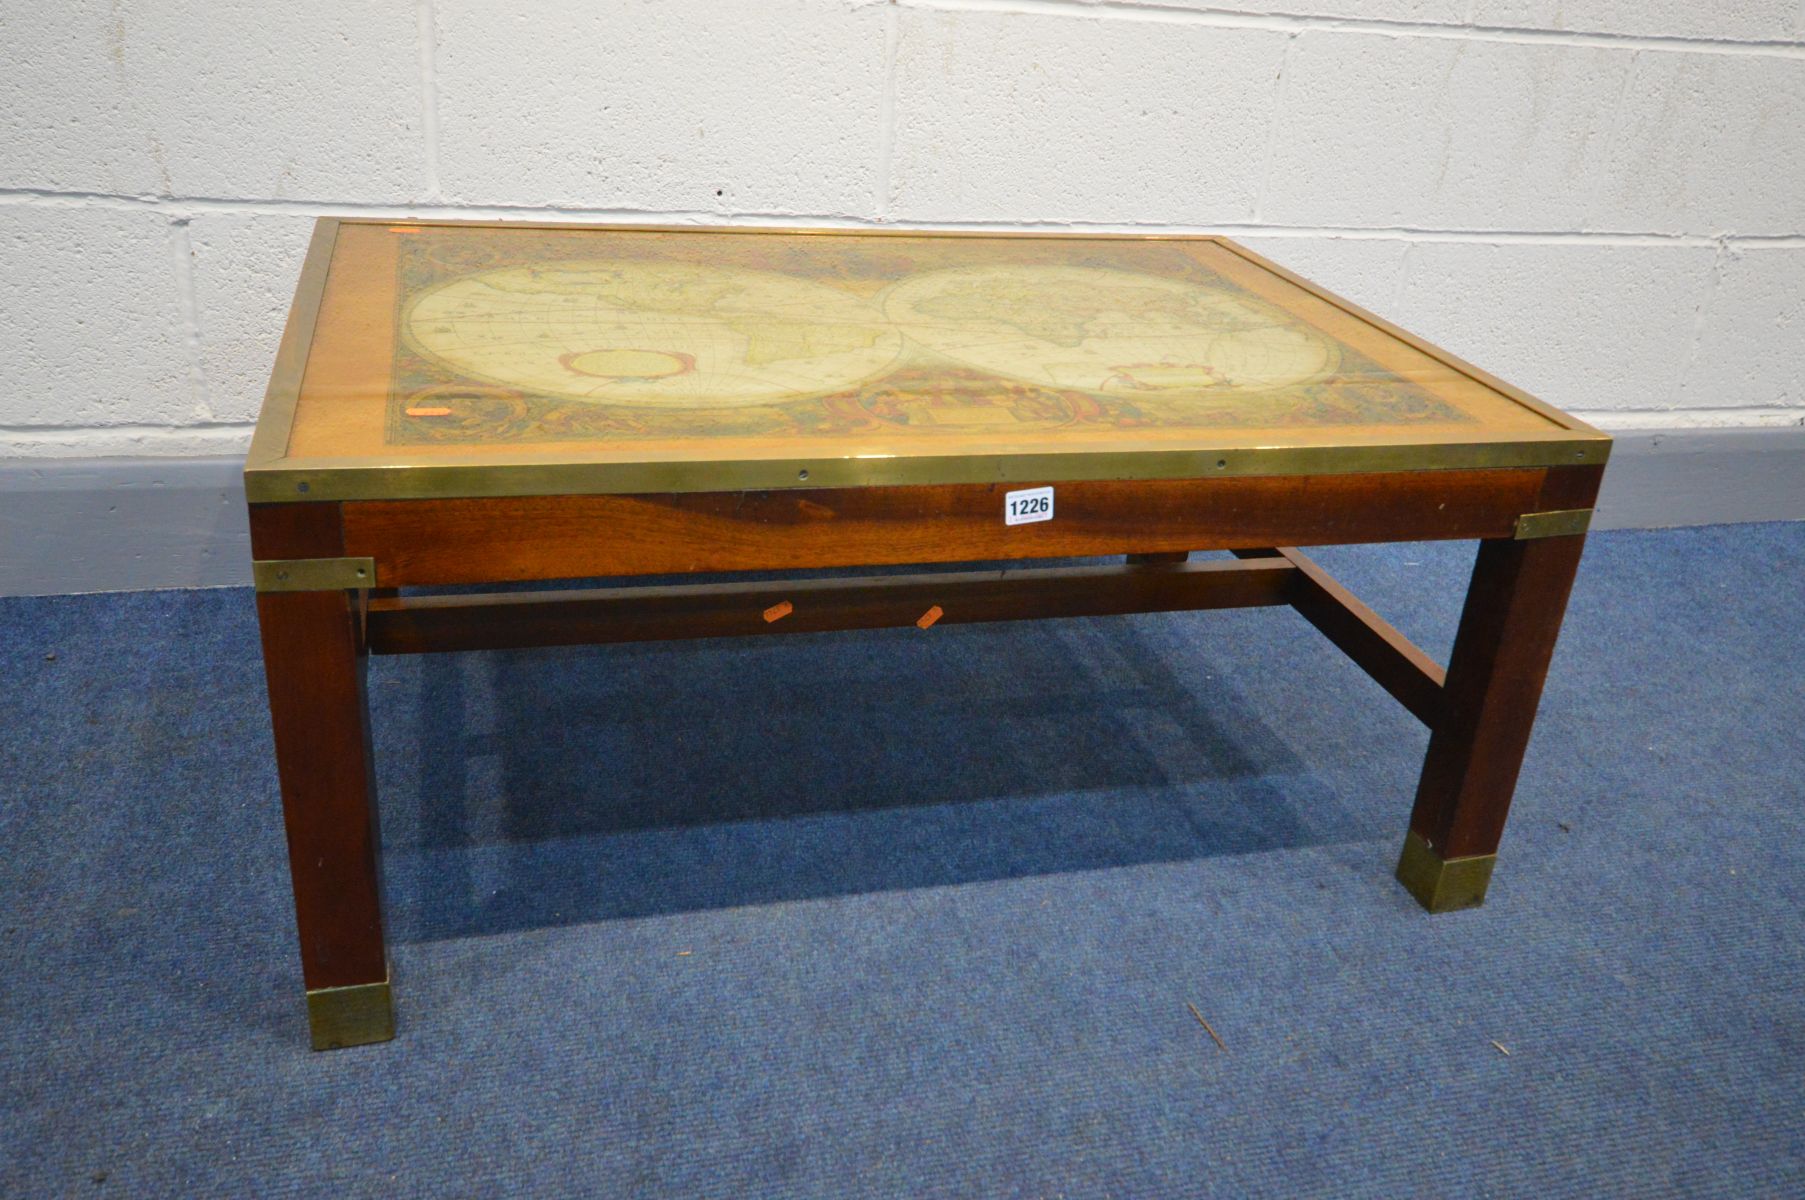 A MAHOGANY AND BRASS BANDED COFFEE TABLE, depicting a world map in two globes, with a glass top